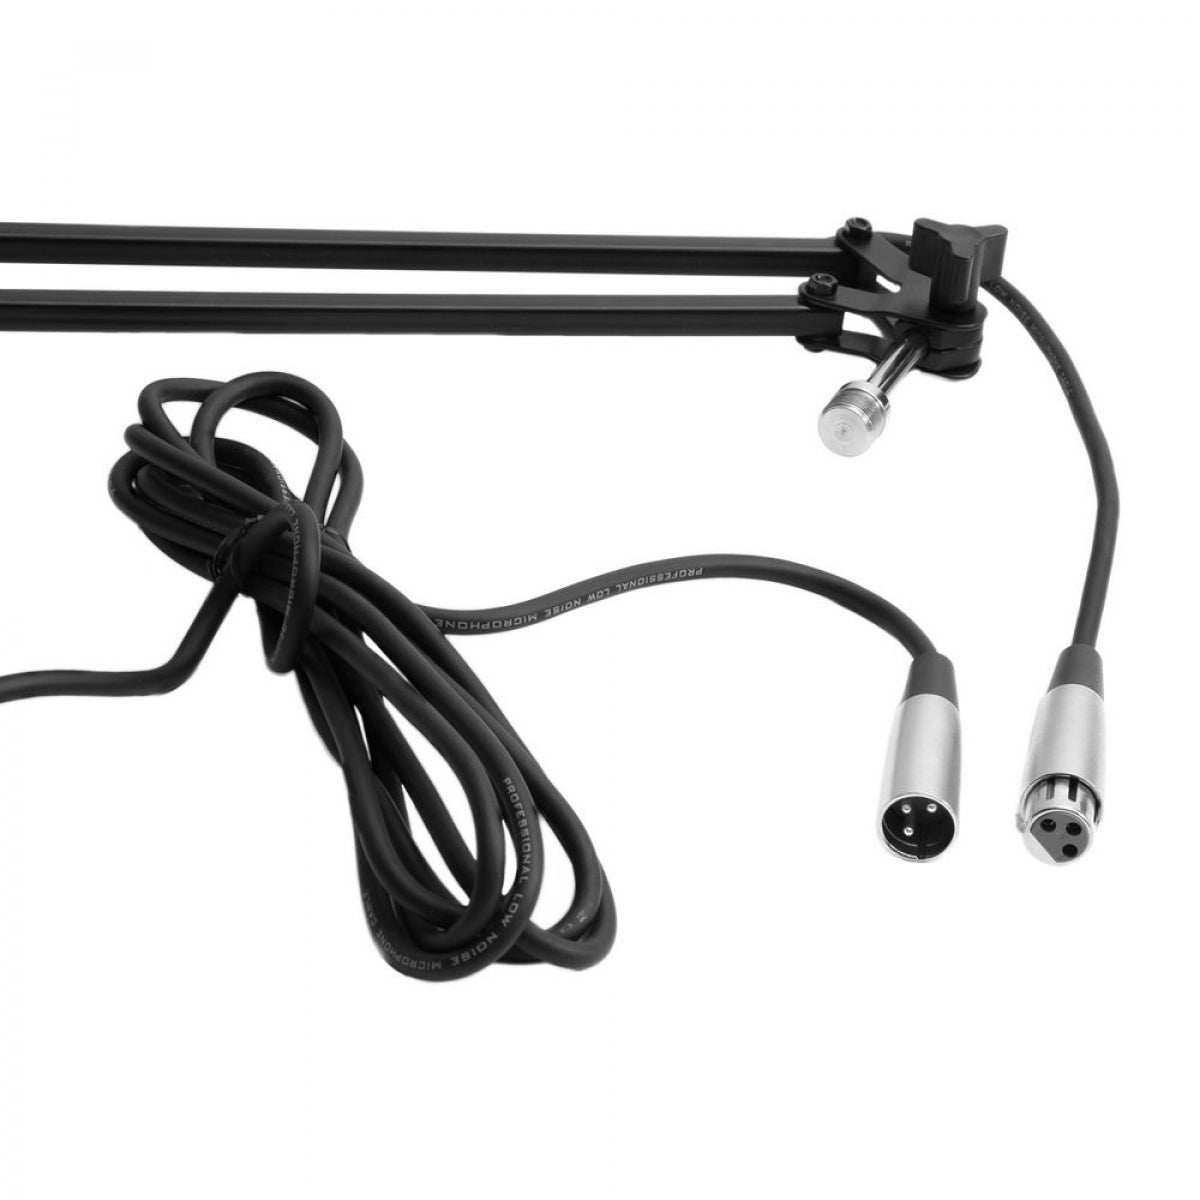 On-Stage MBS5000 Articulating Broadcast/Podcast/Studio Microphone Boom Arm